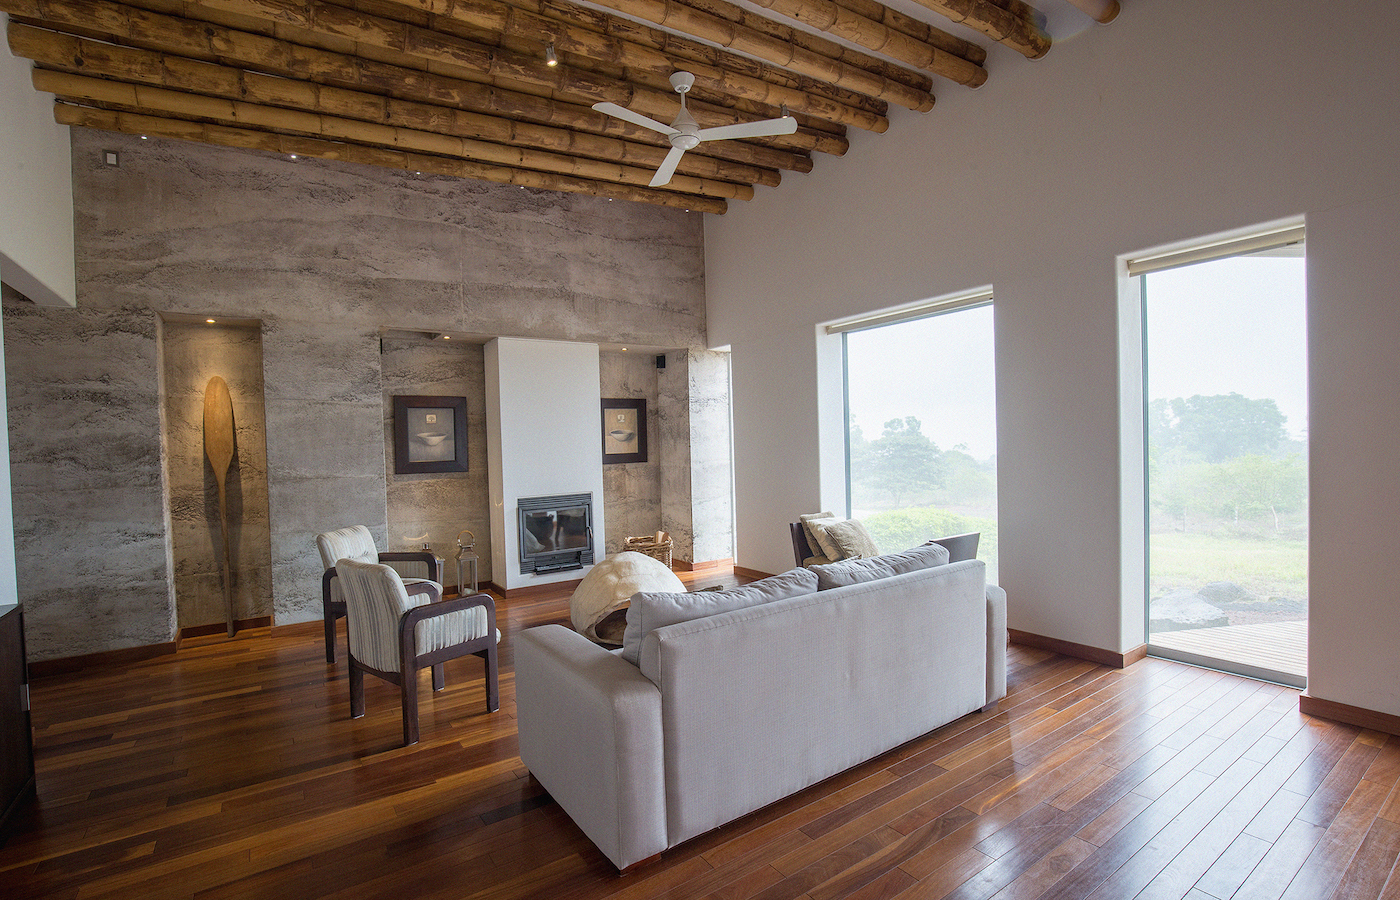 Interiors of the Montemar Eco Luxury Villas - Luxury holidays to the Galapagos